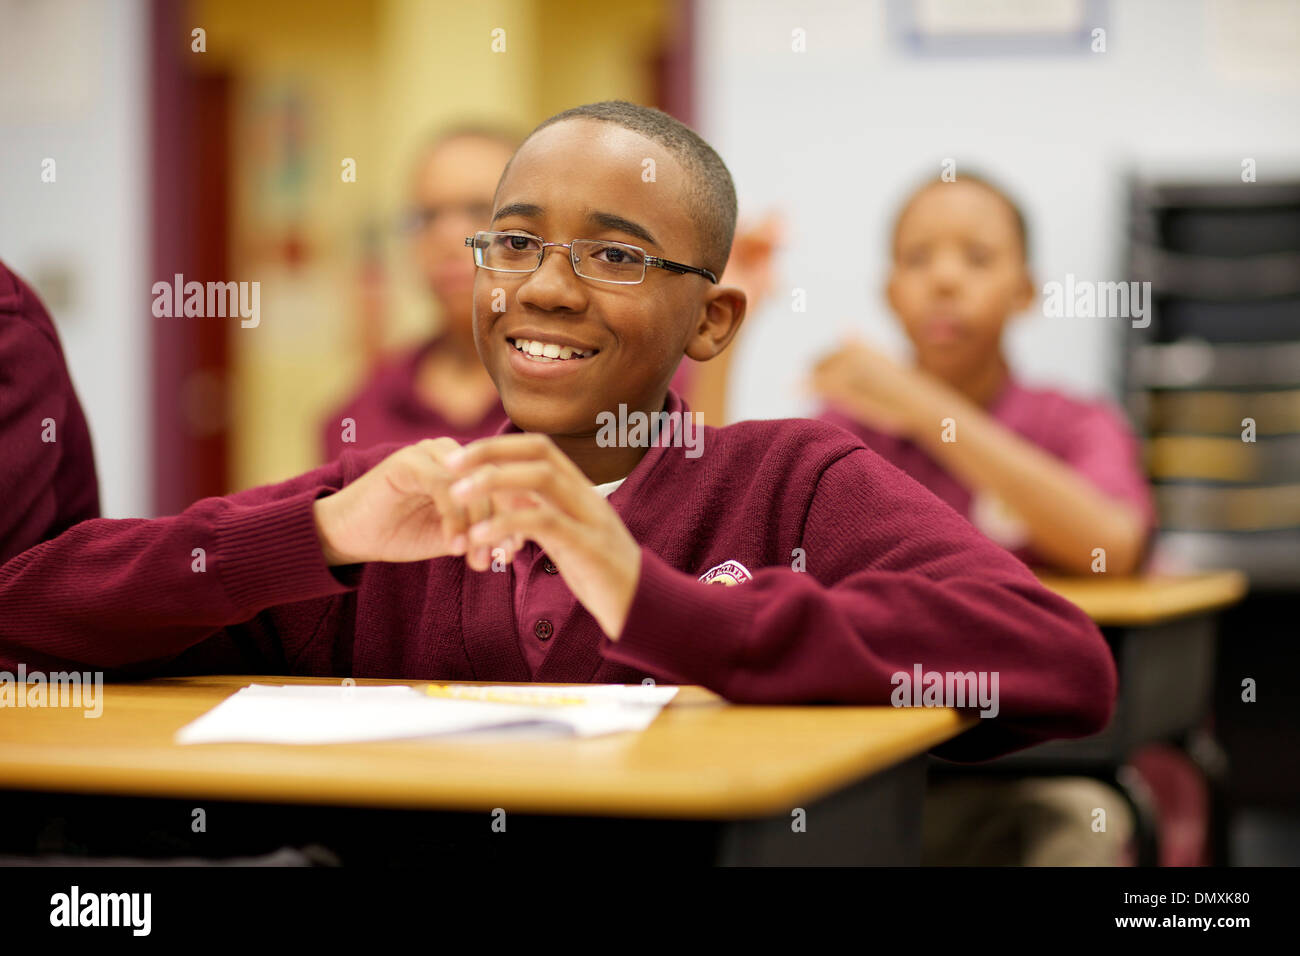 Middle school aged African American boy paying attention in class. Stock Photo